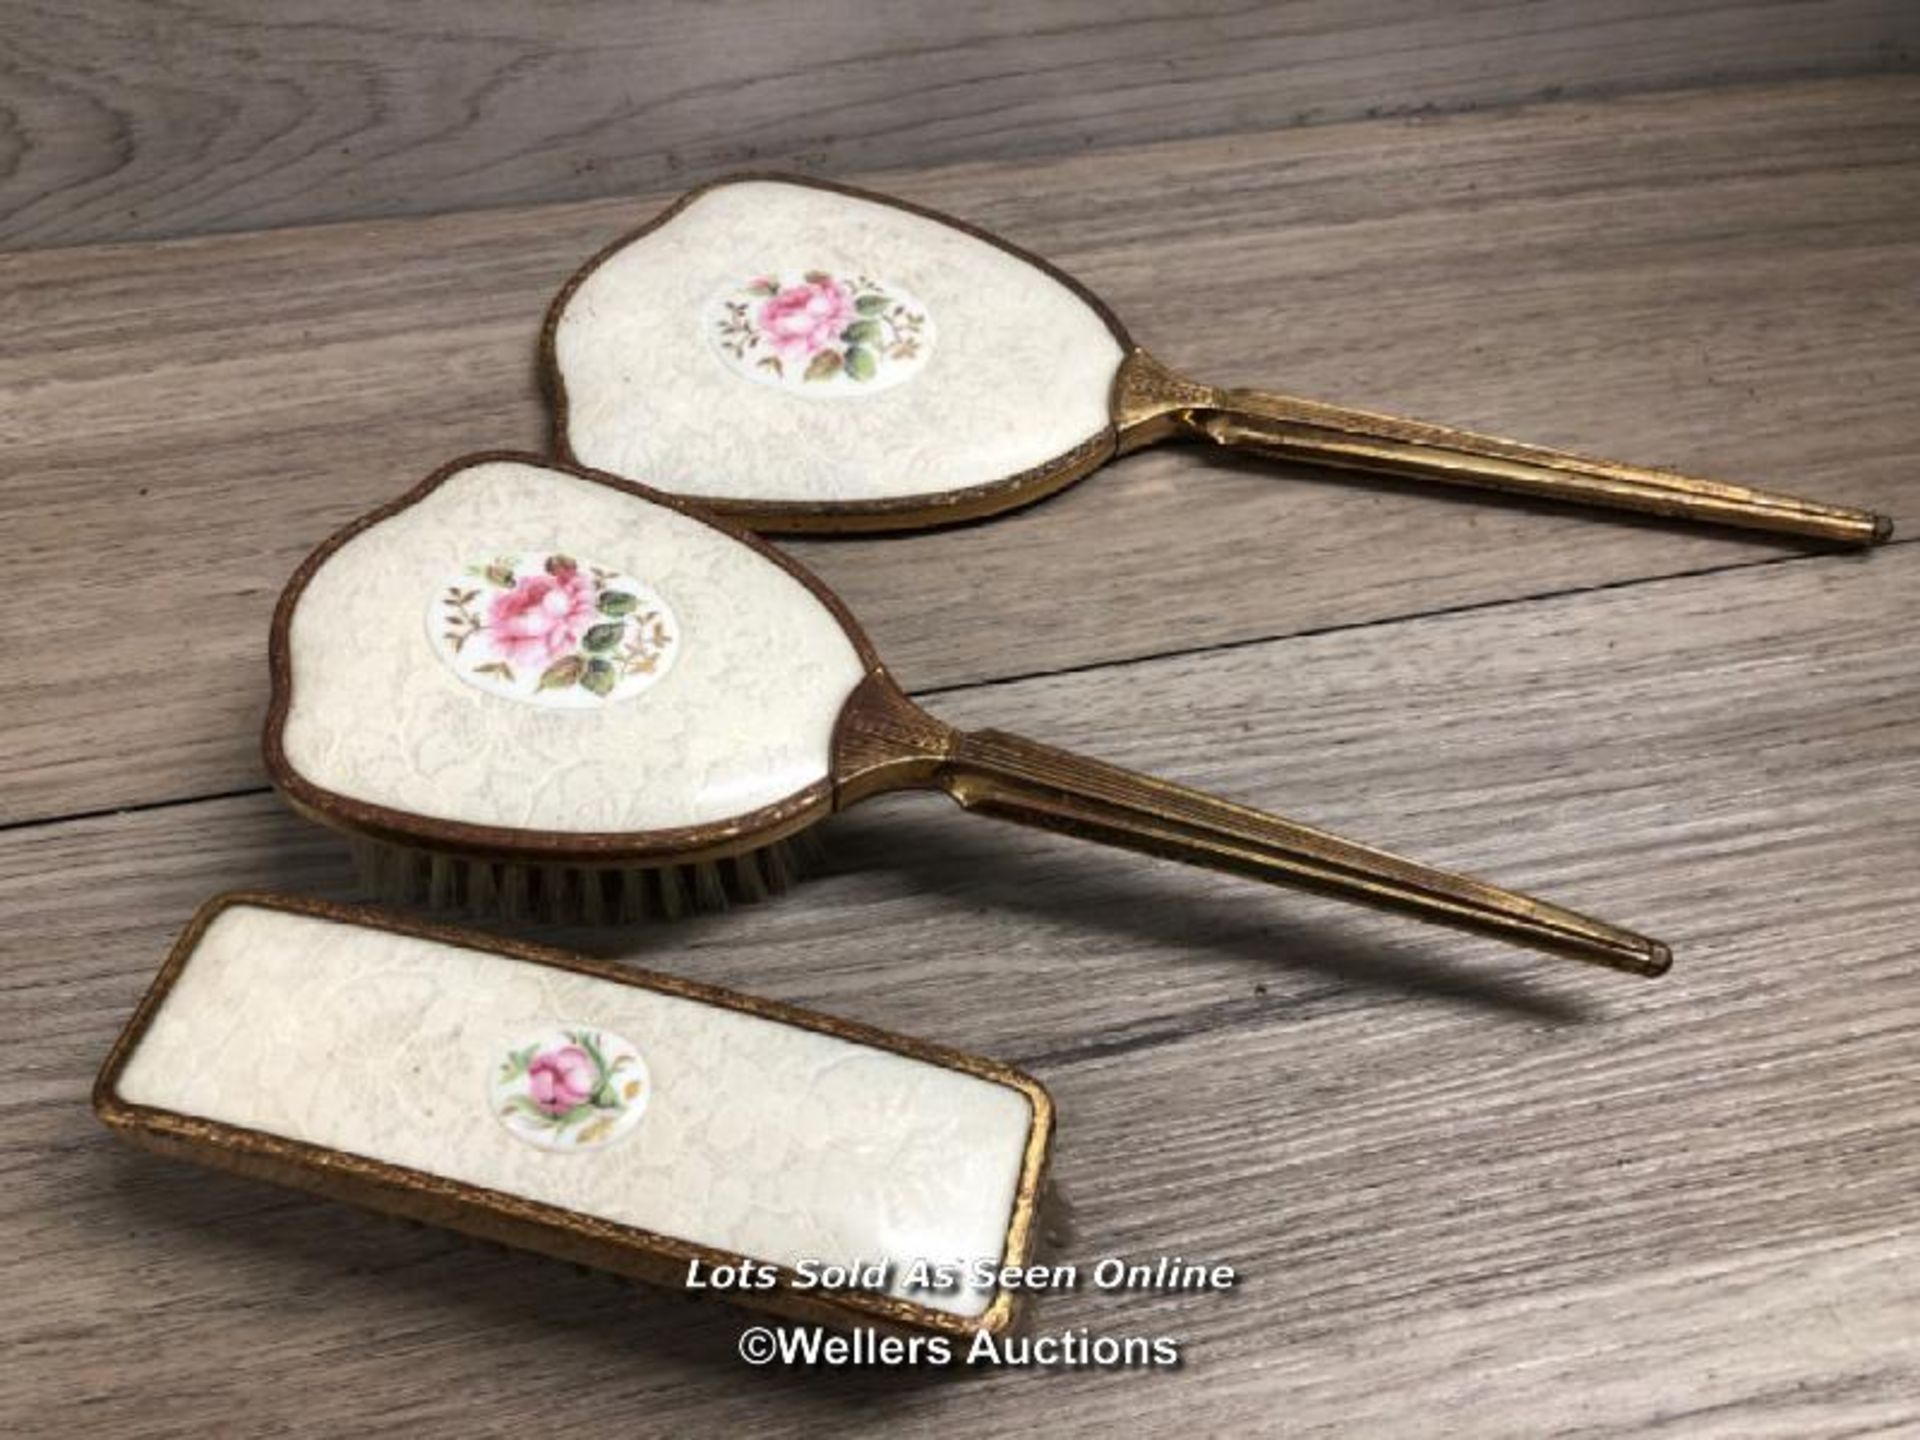 VINTAGE 1960'S DRESSING TABLE VANITY BRUSH AND MIRROR SET - Image 2 of 3